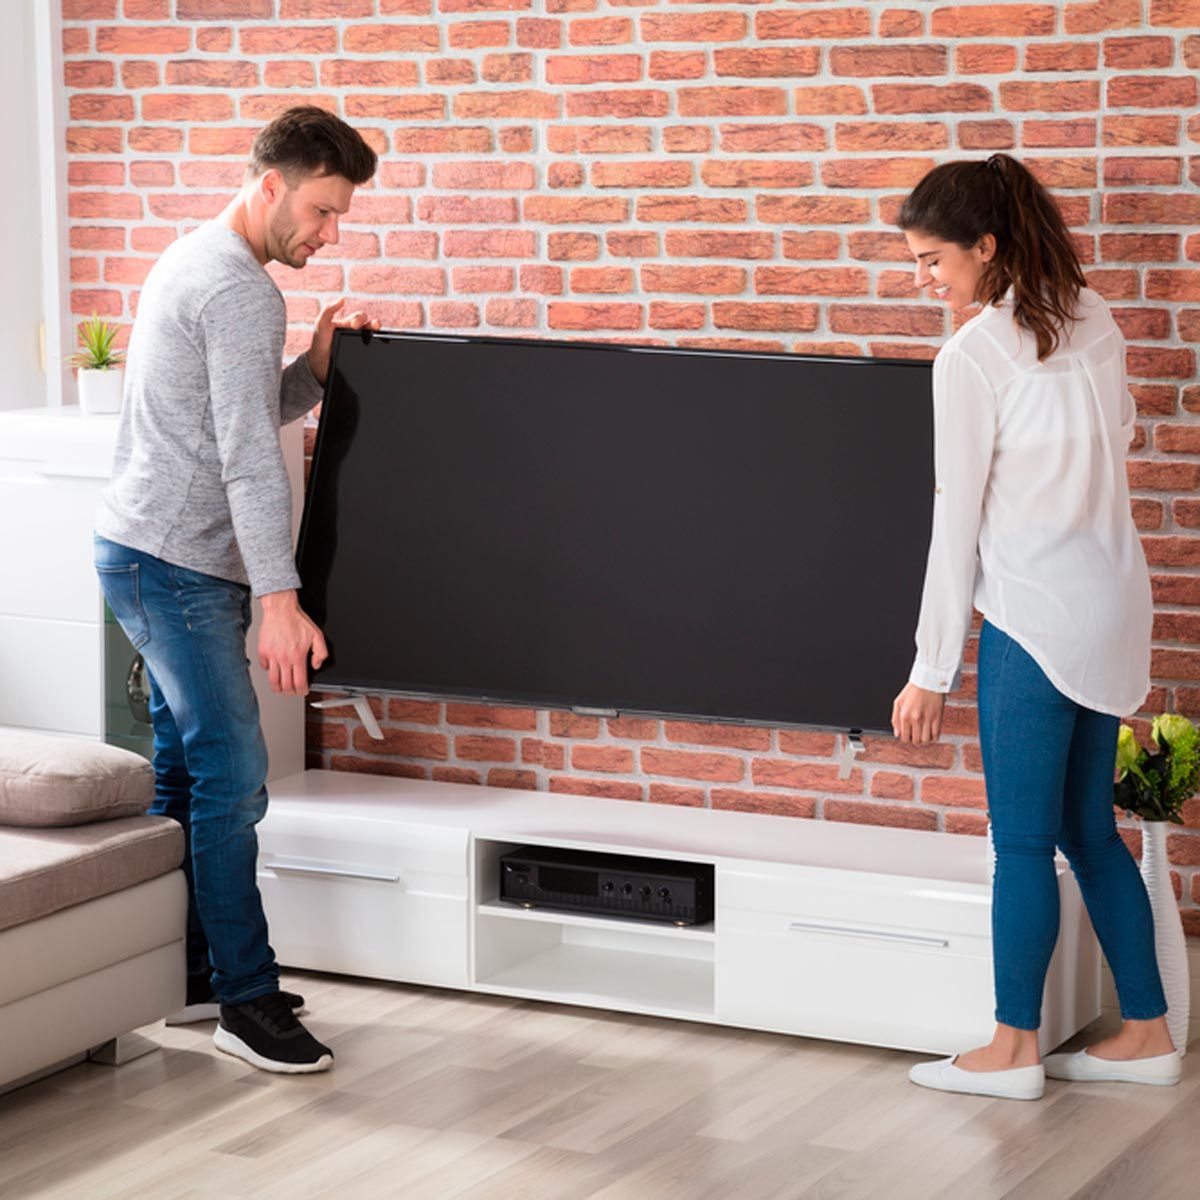 What Is a Smart TV and Why Do I Need One?